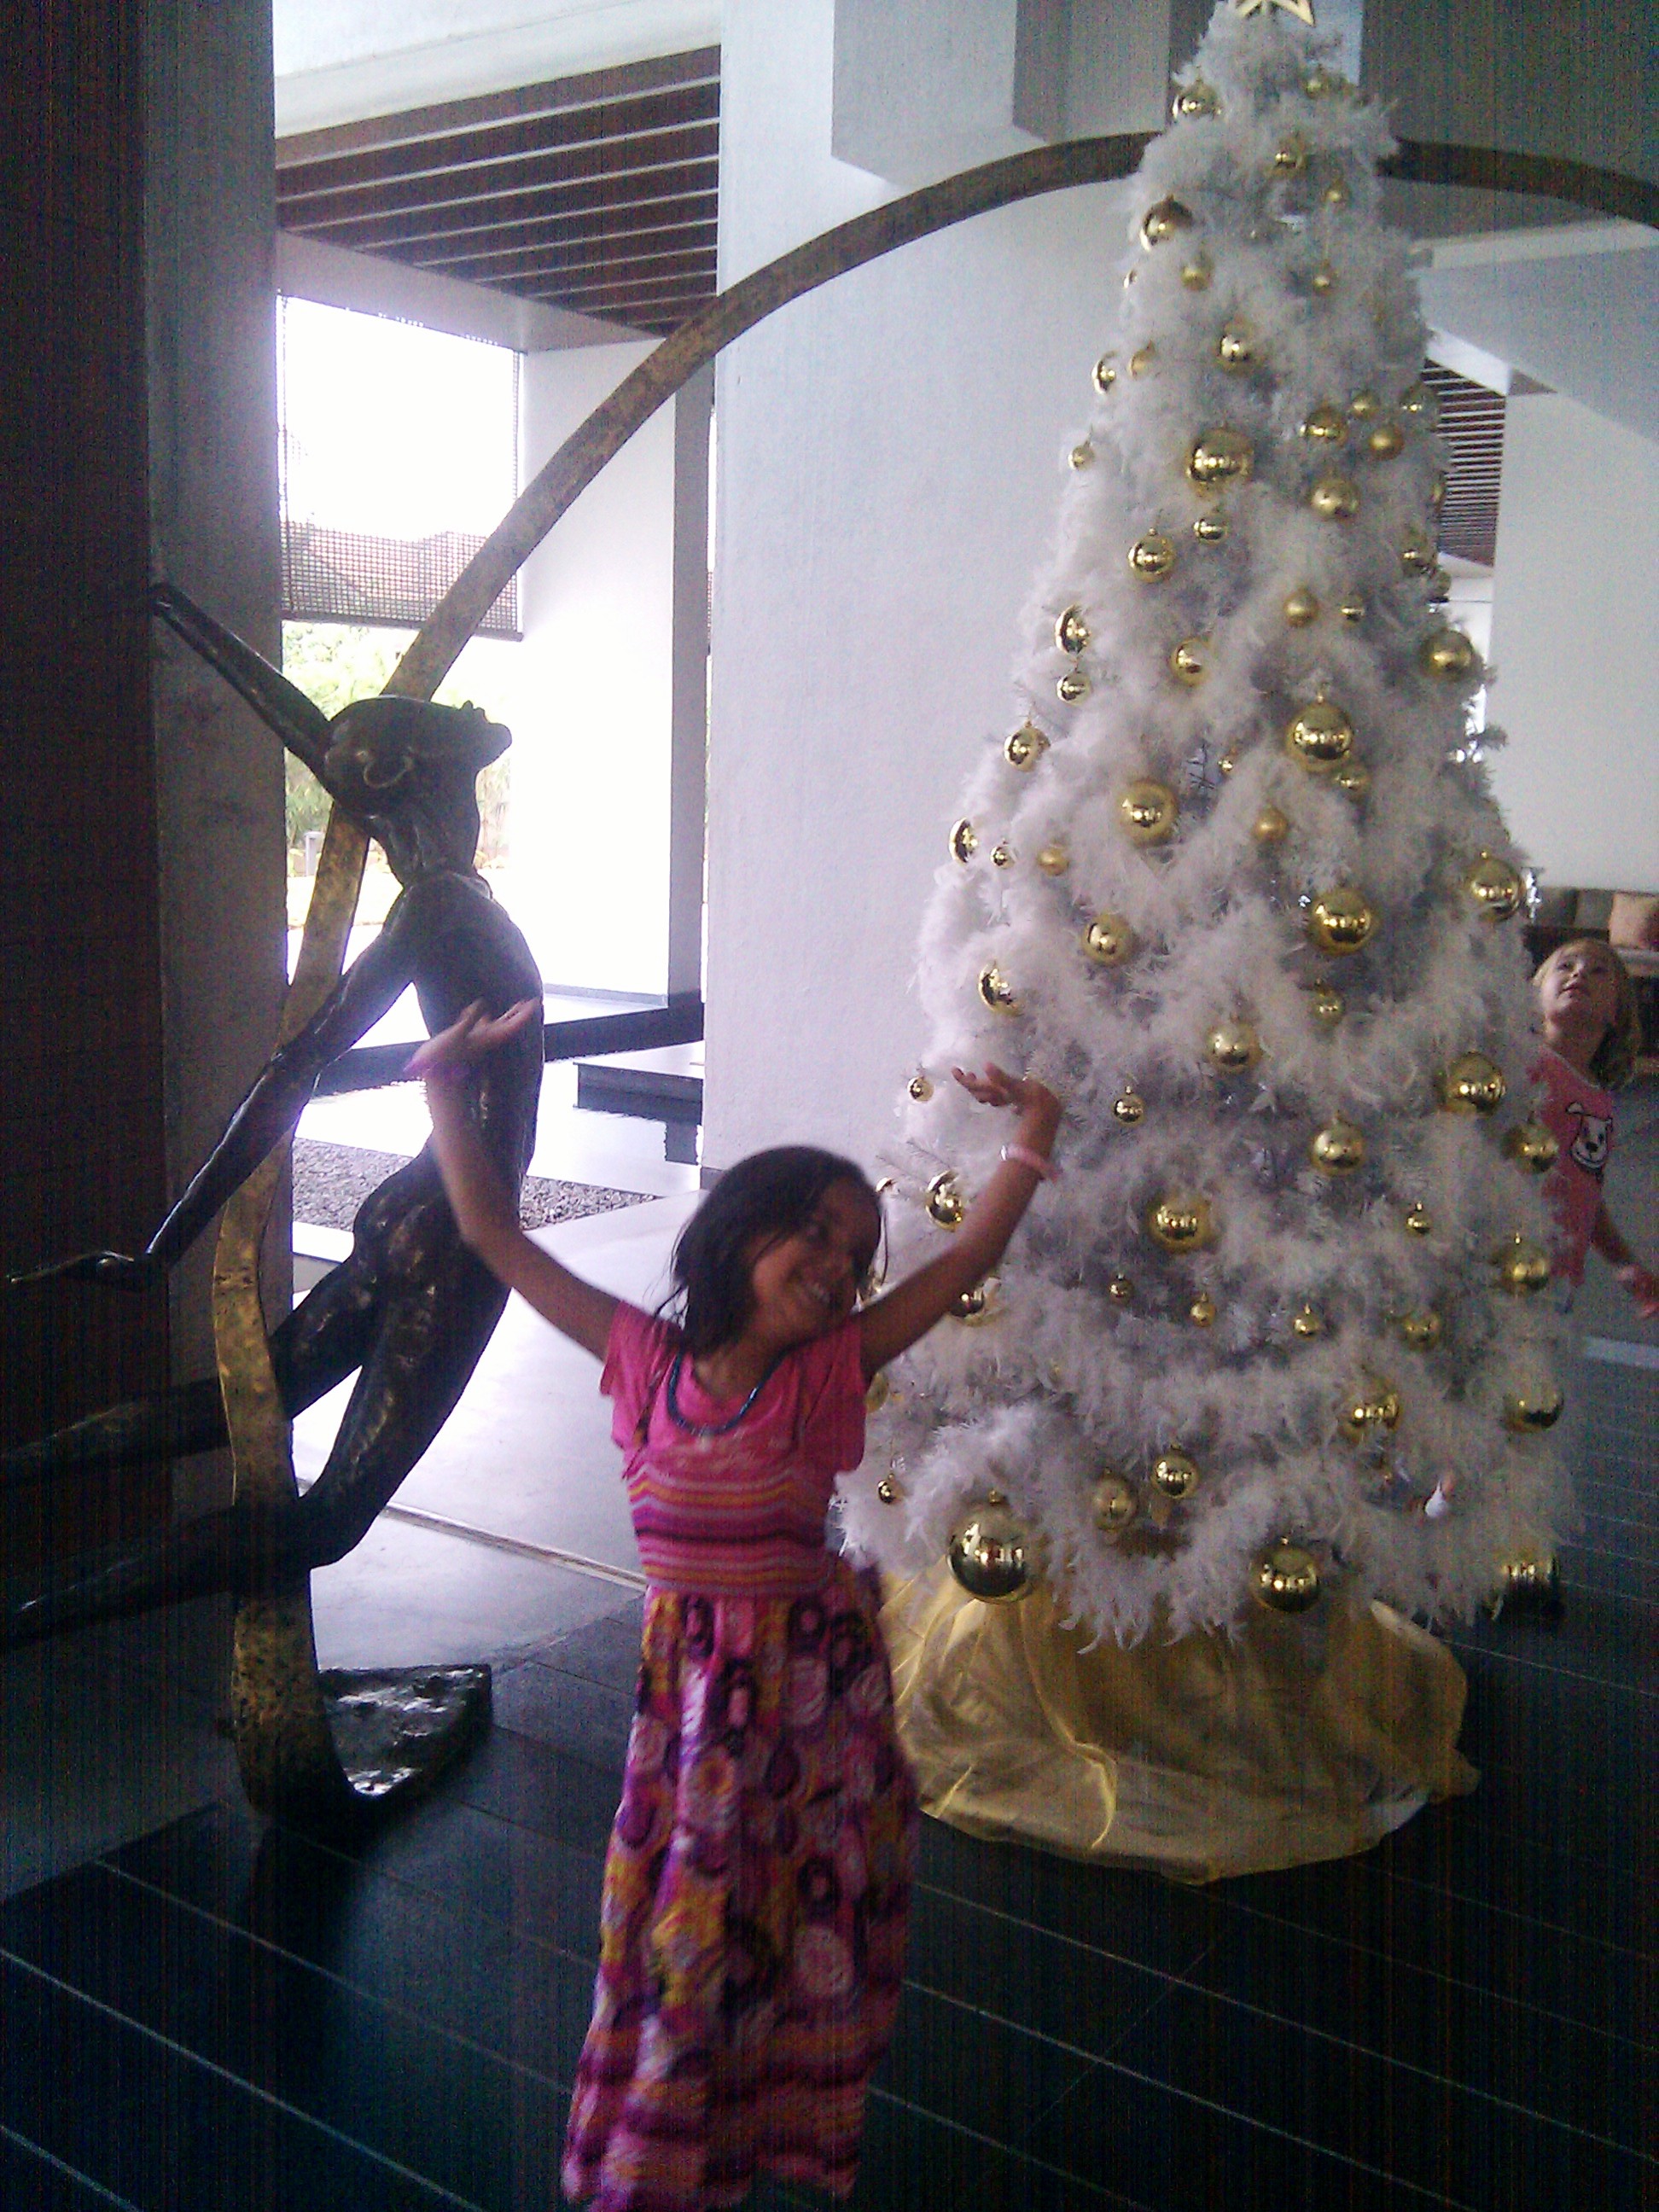 A happy jig in front of the Christmas tree